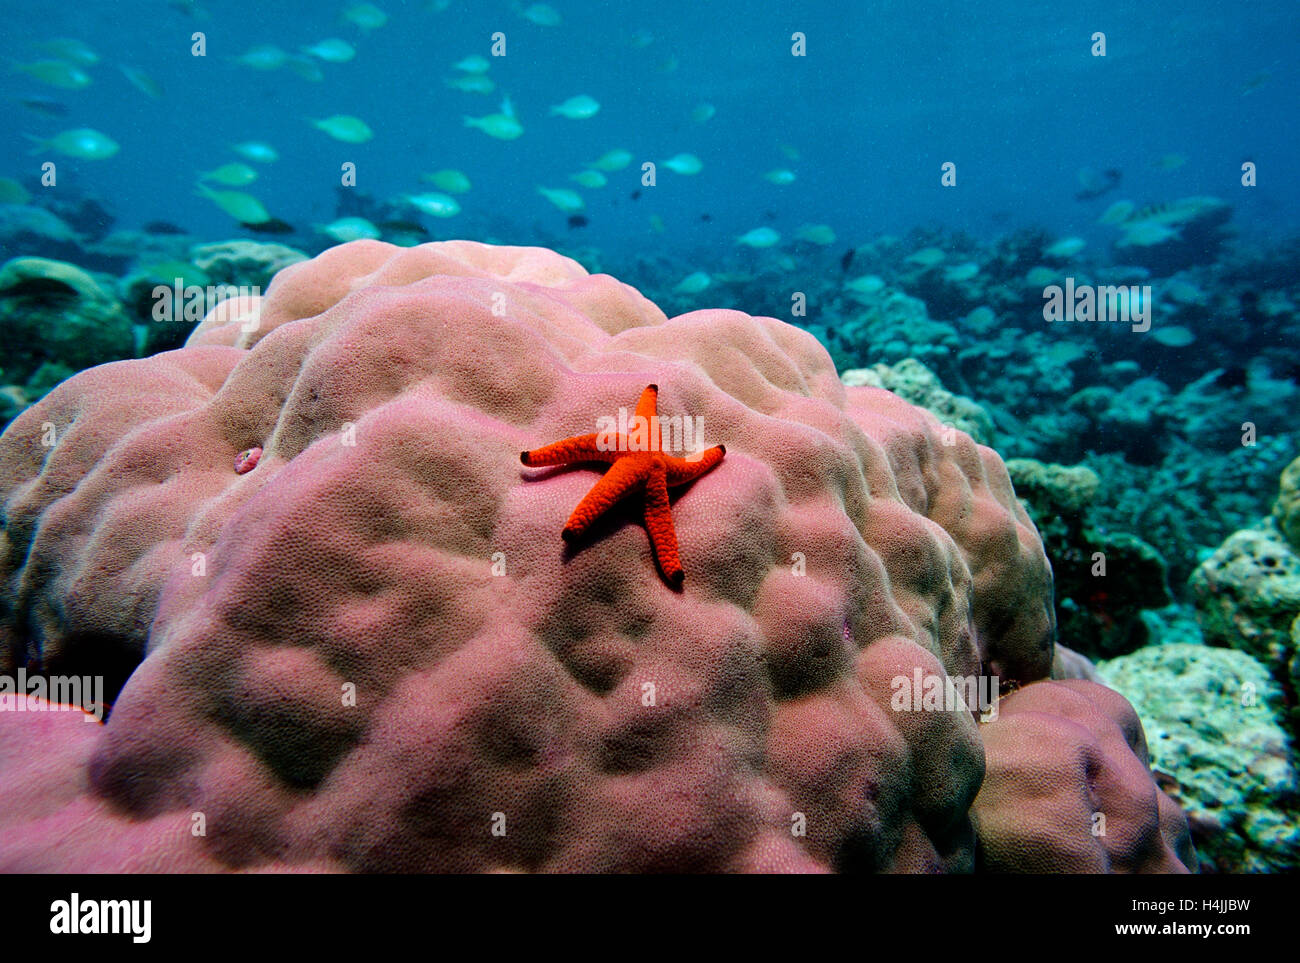 Red-knobbed star (Fromia elegans) on Pore Coral, Indian Ocean, Maldives Stock Photo